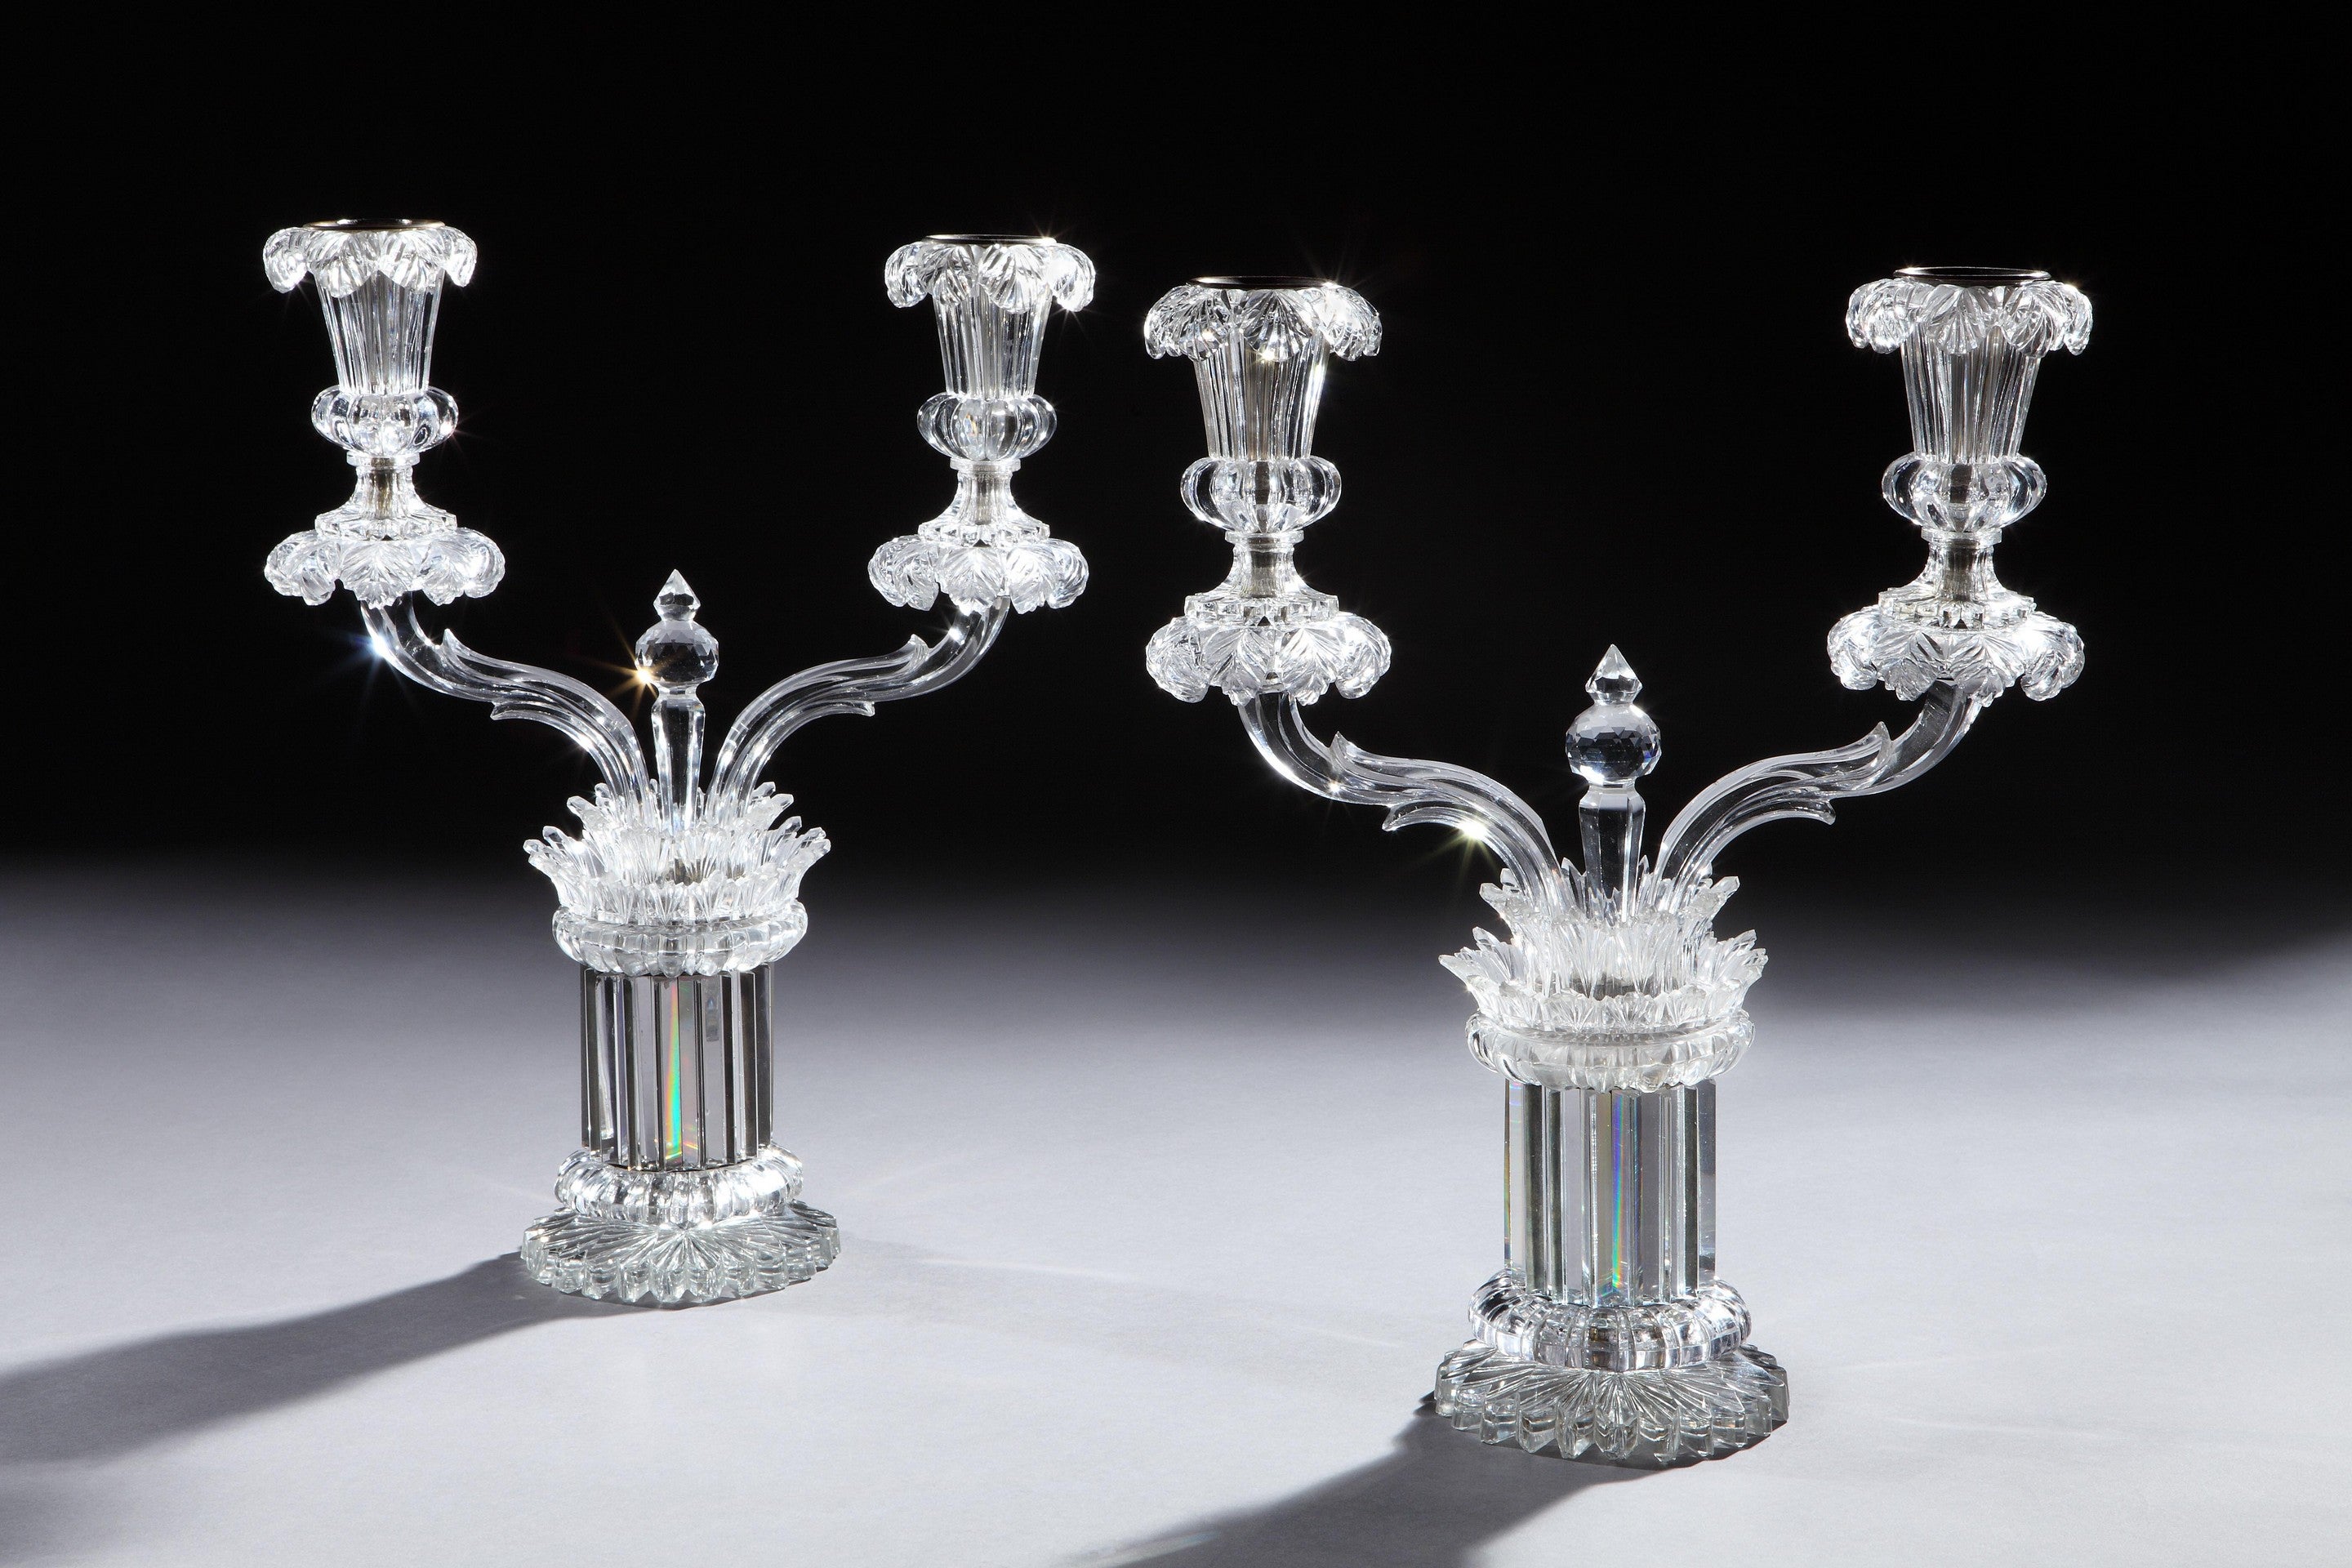 Pair of William IV Cut Glass, Perry Two-Branch Table Candelabras